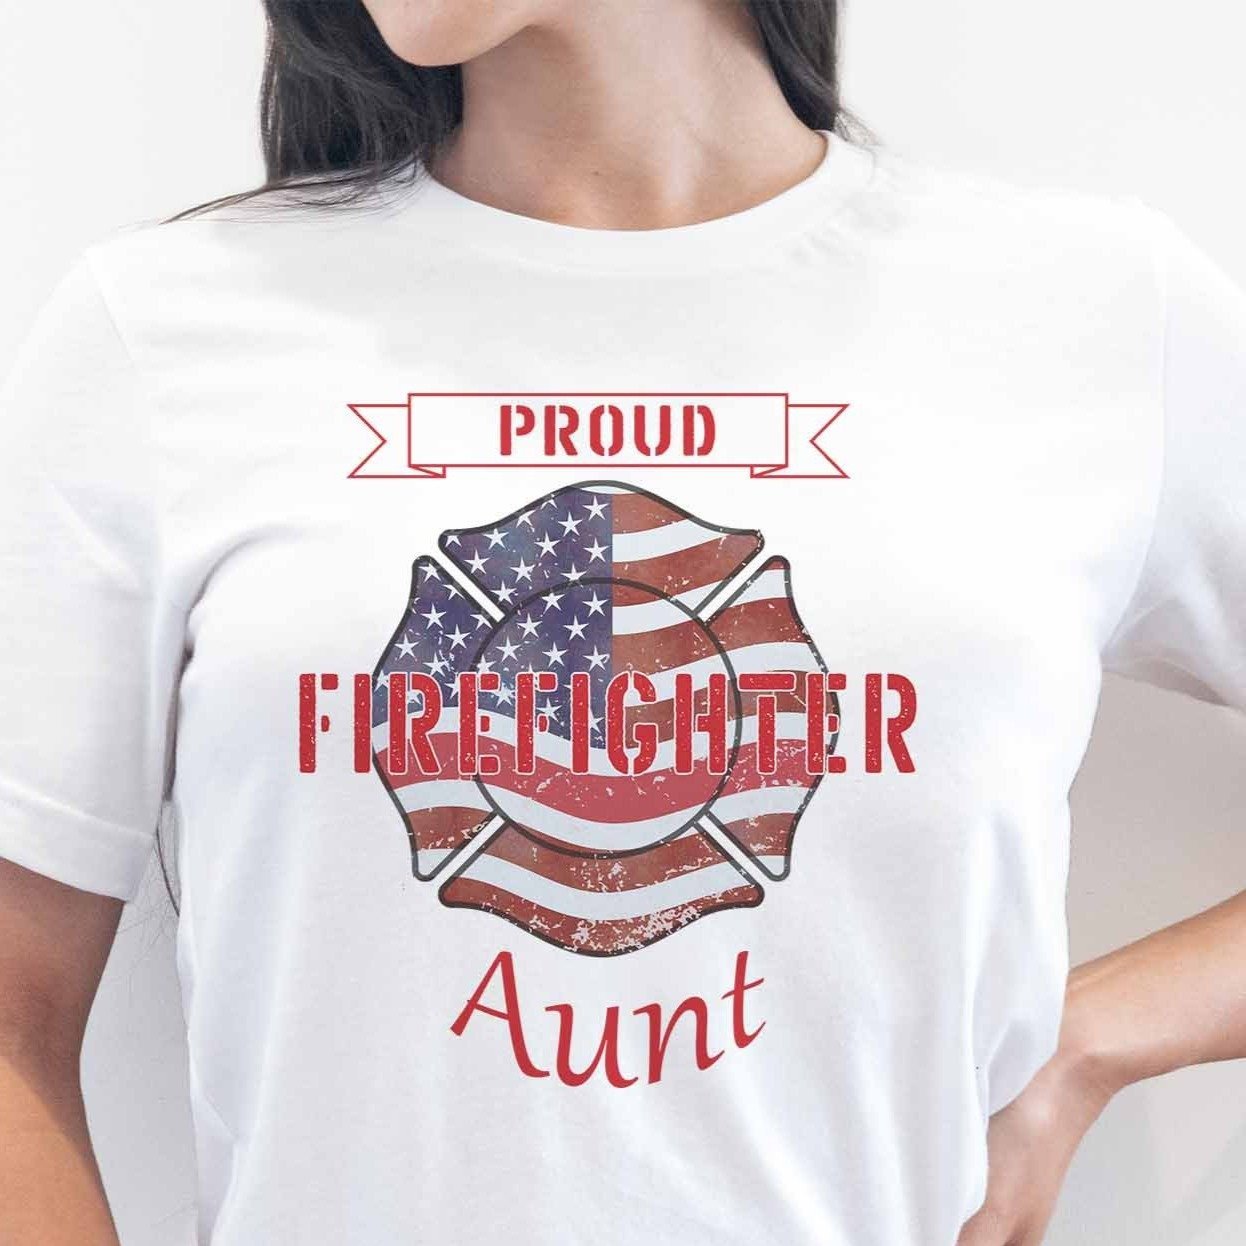 Proud Firefighter Aunt - My Custom Tee Party